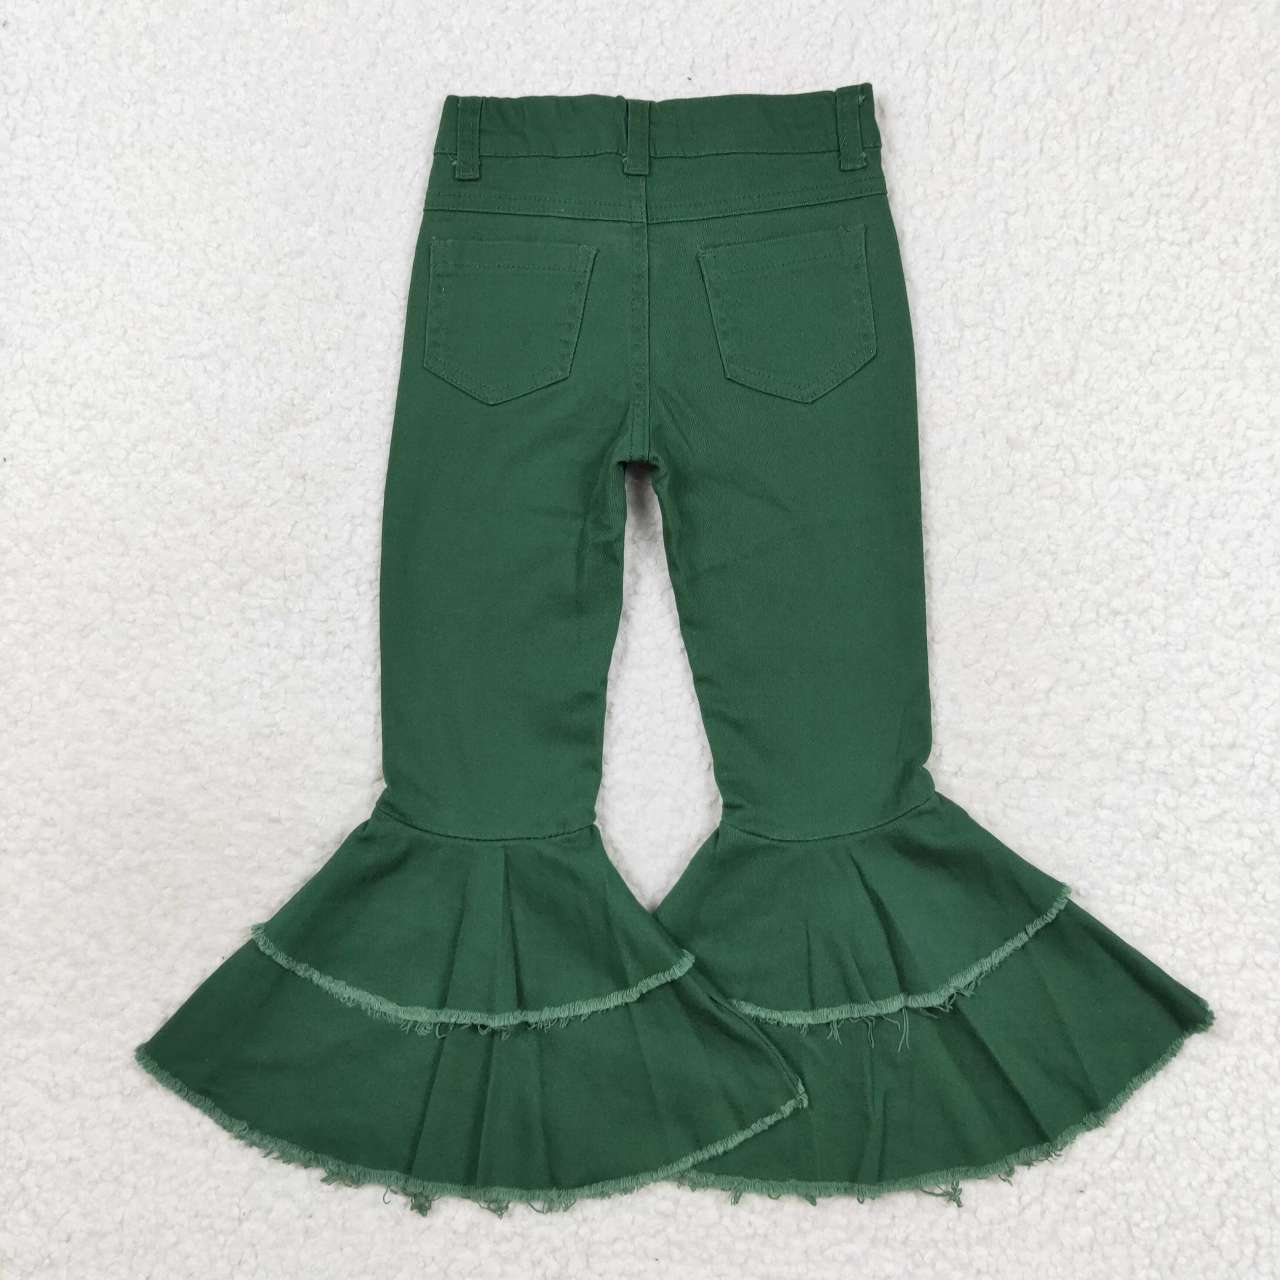 green flare bottom jeans denim pants western girls clothes